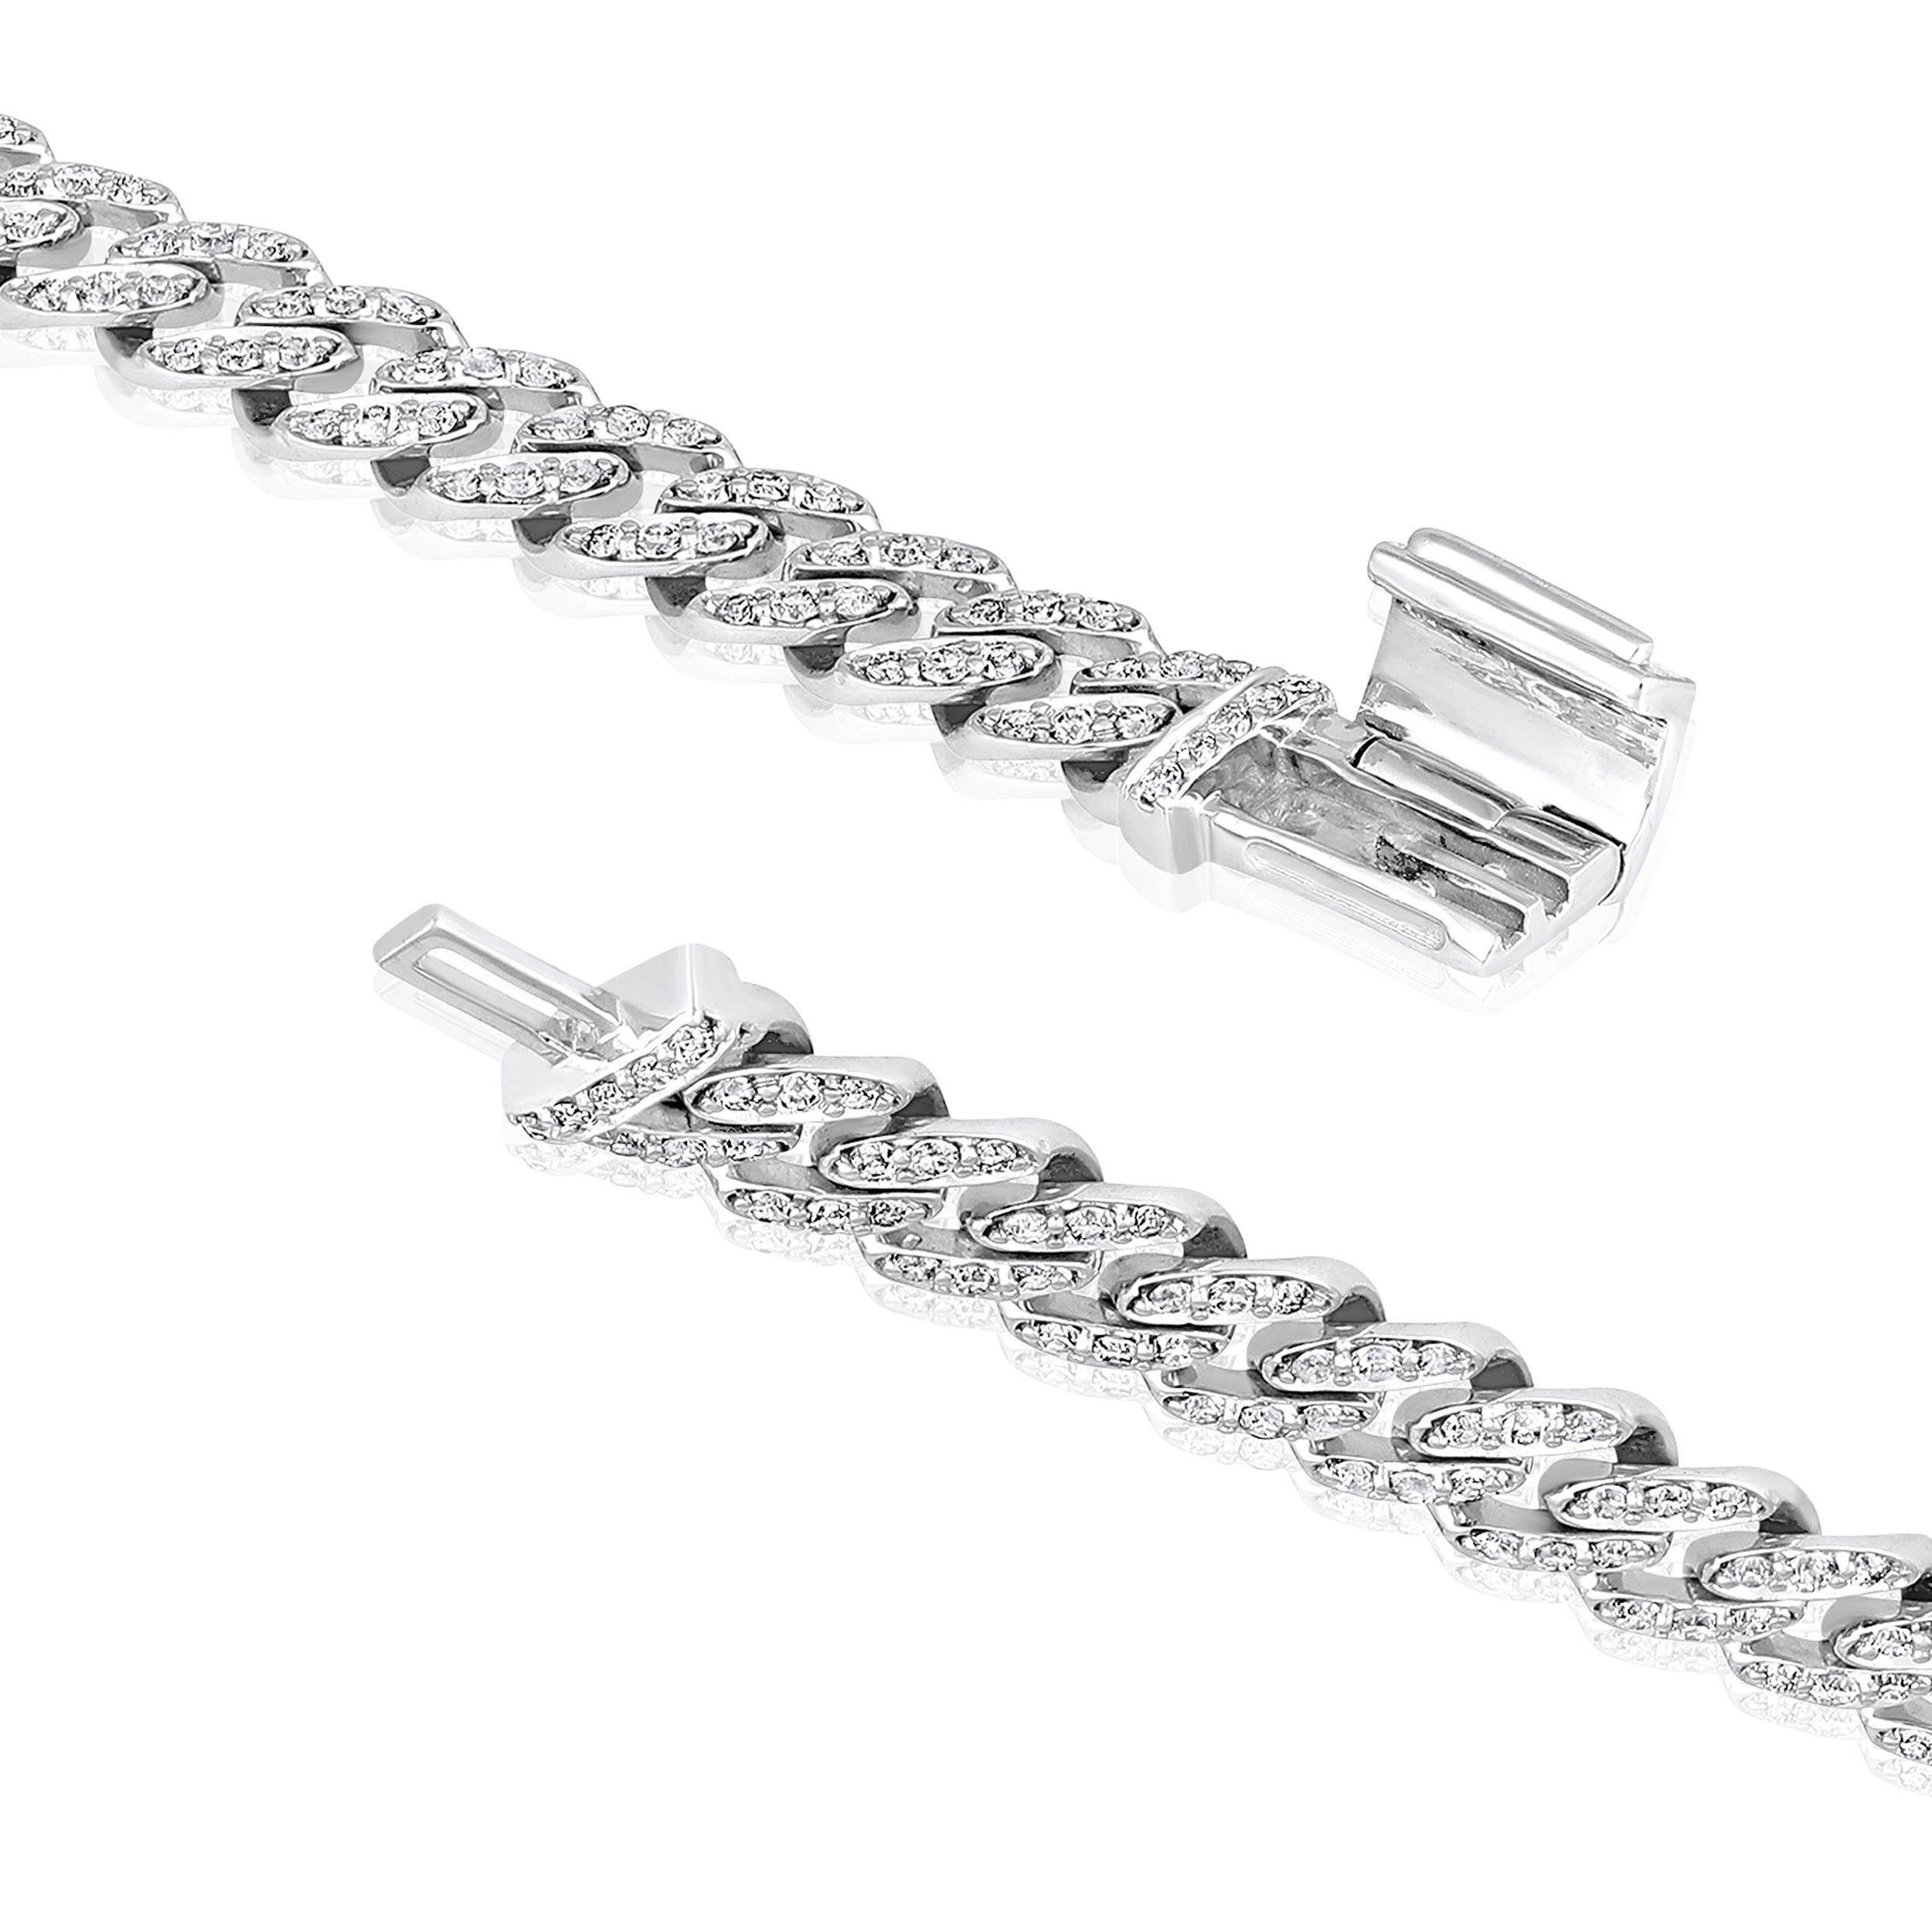 Crafted in 6.95 grams of 10K White Gold, the bracelet contains 321 stones of Round Diamonds with a total of 1.31 carat in F-G color and I1-I2 carat. The bracelet length is 7 inches.

CONTEMPORARY AND TIMELESS ESSENCE: Crafted in 14-karat/18-karat